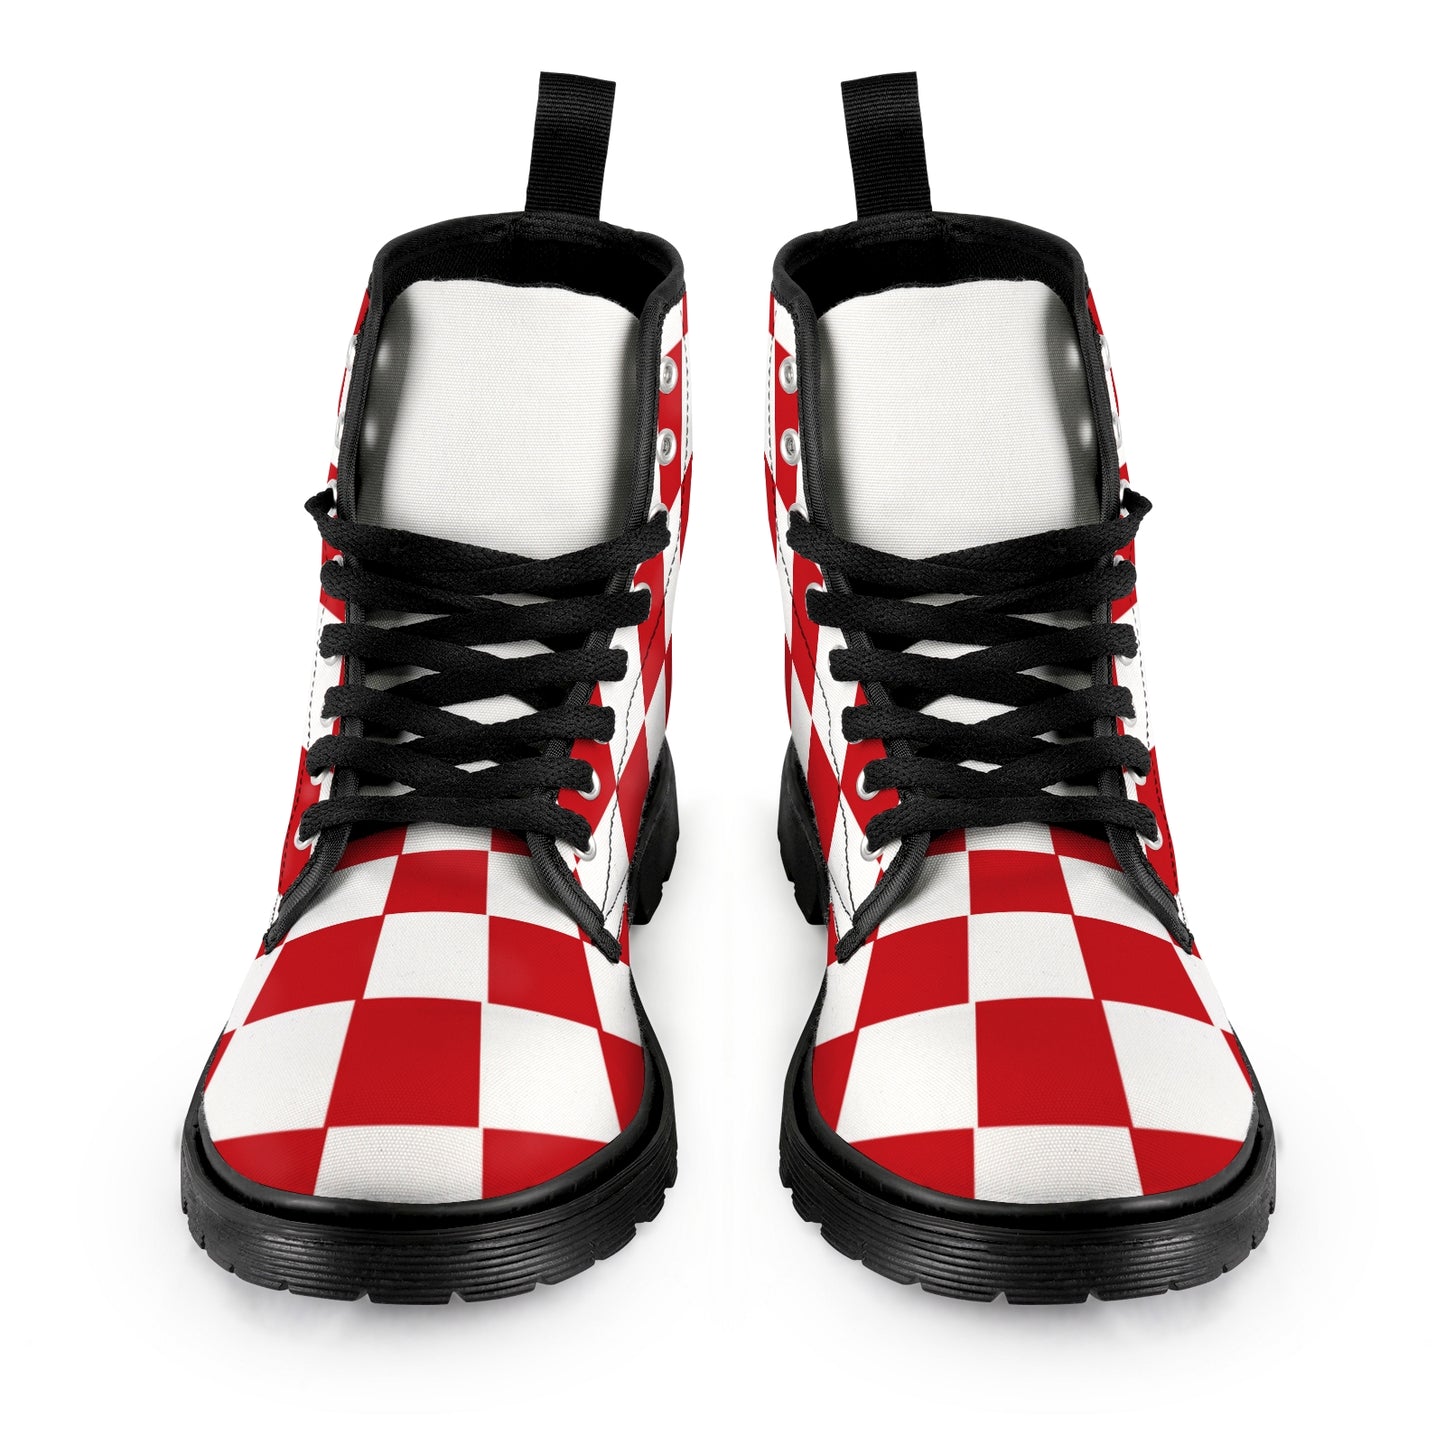 Men's Lace Up Canvas Boots - Red Checkers